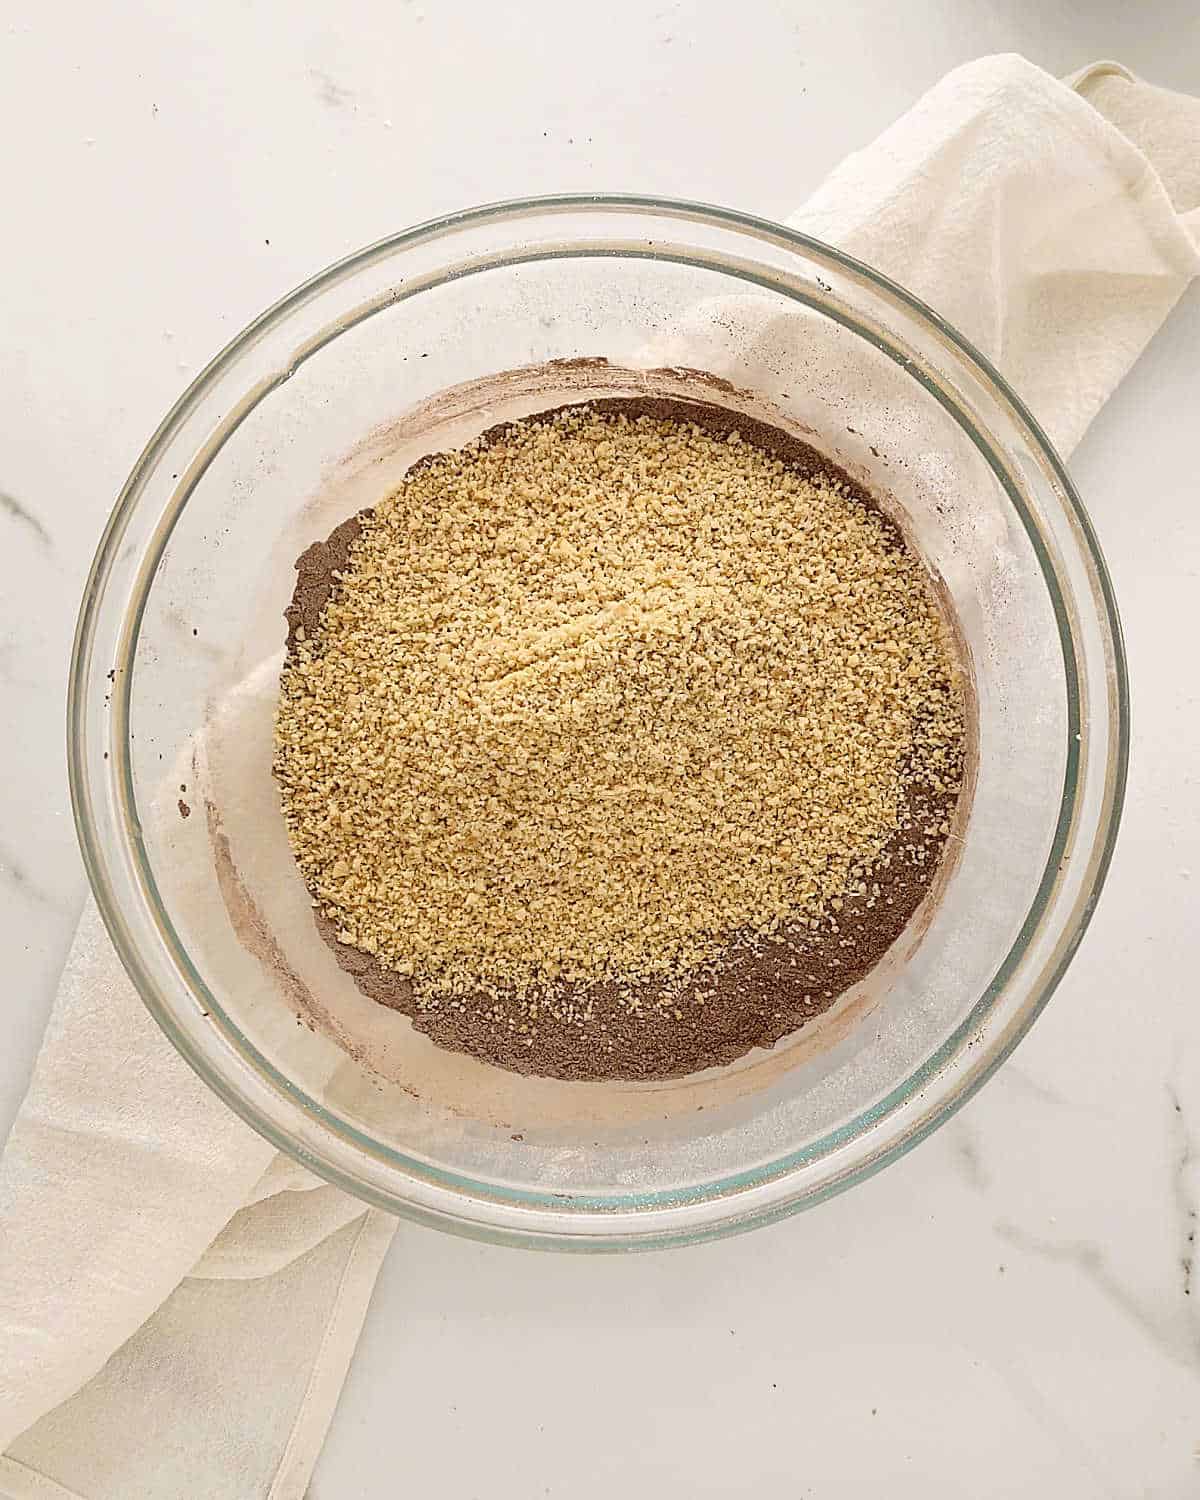 Ground hazelnuts and cocoa powder in a glass bowl set on a white cloth on a white marble surface.